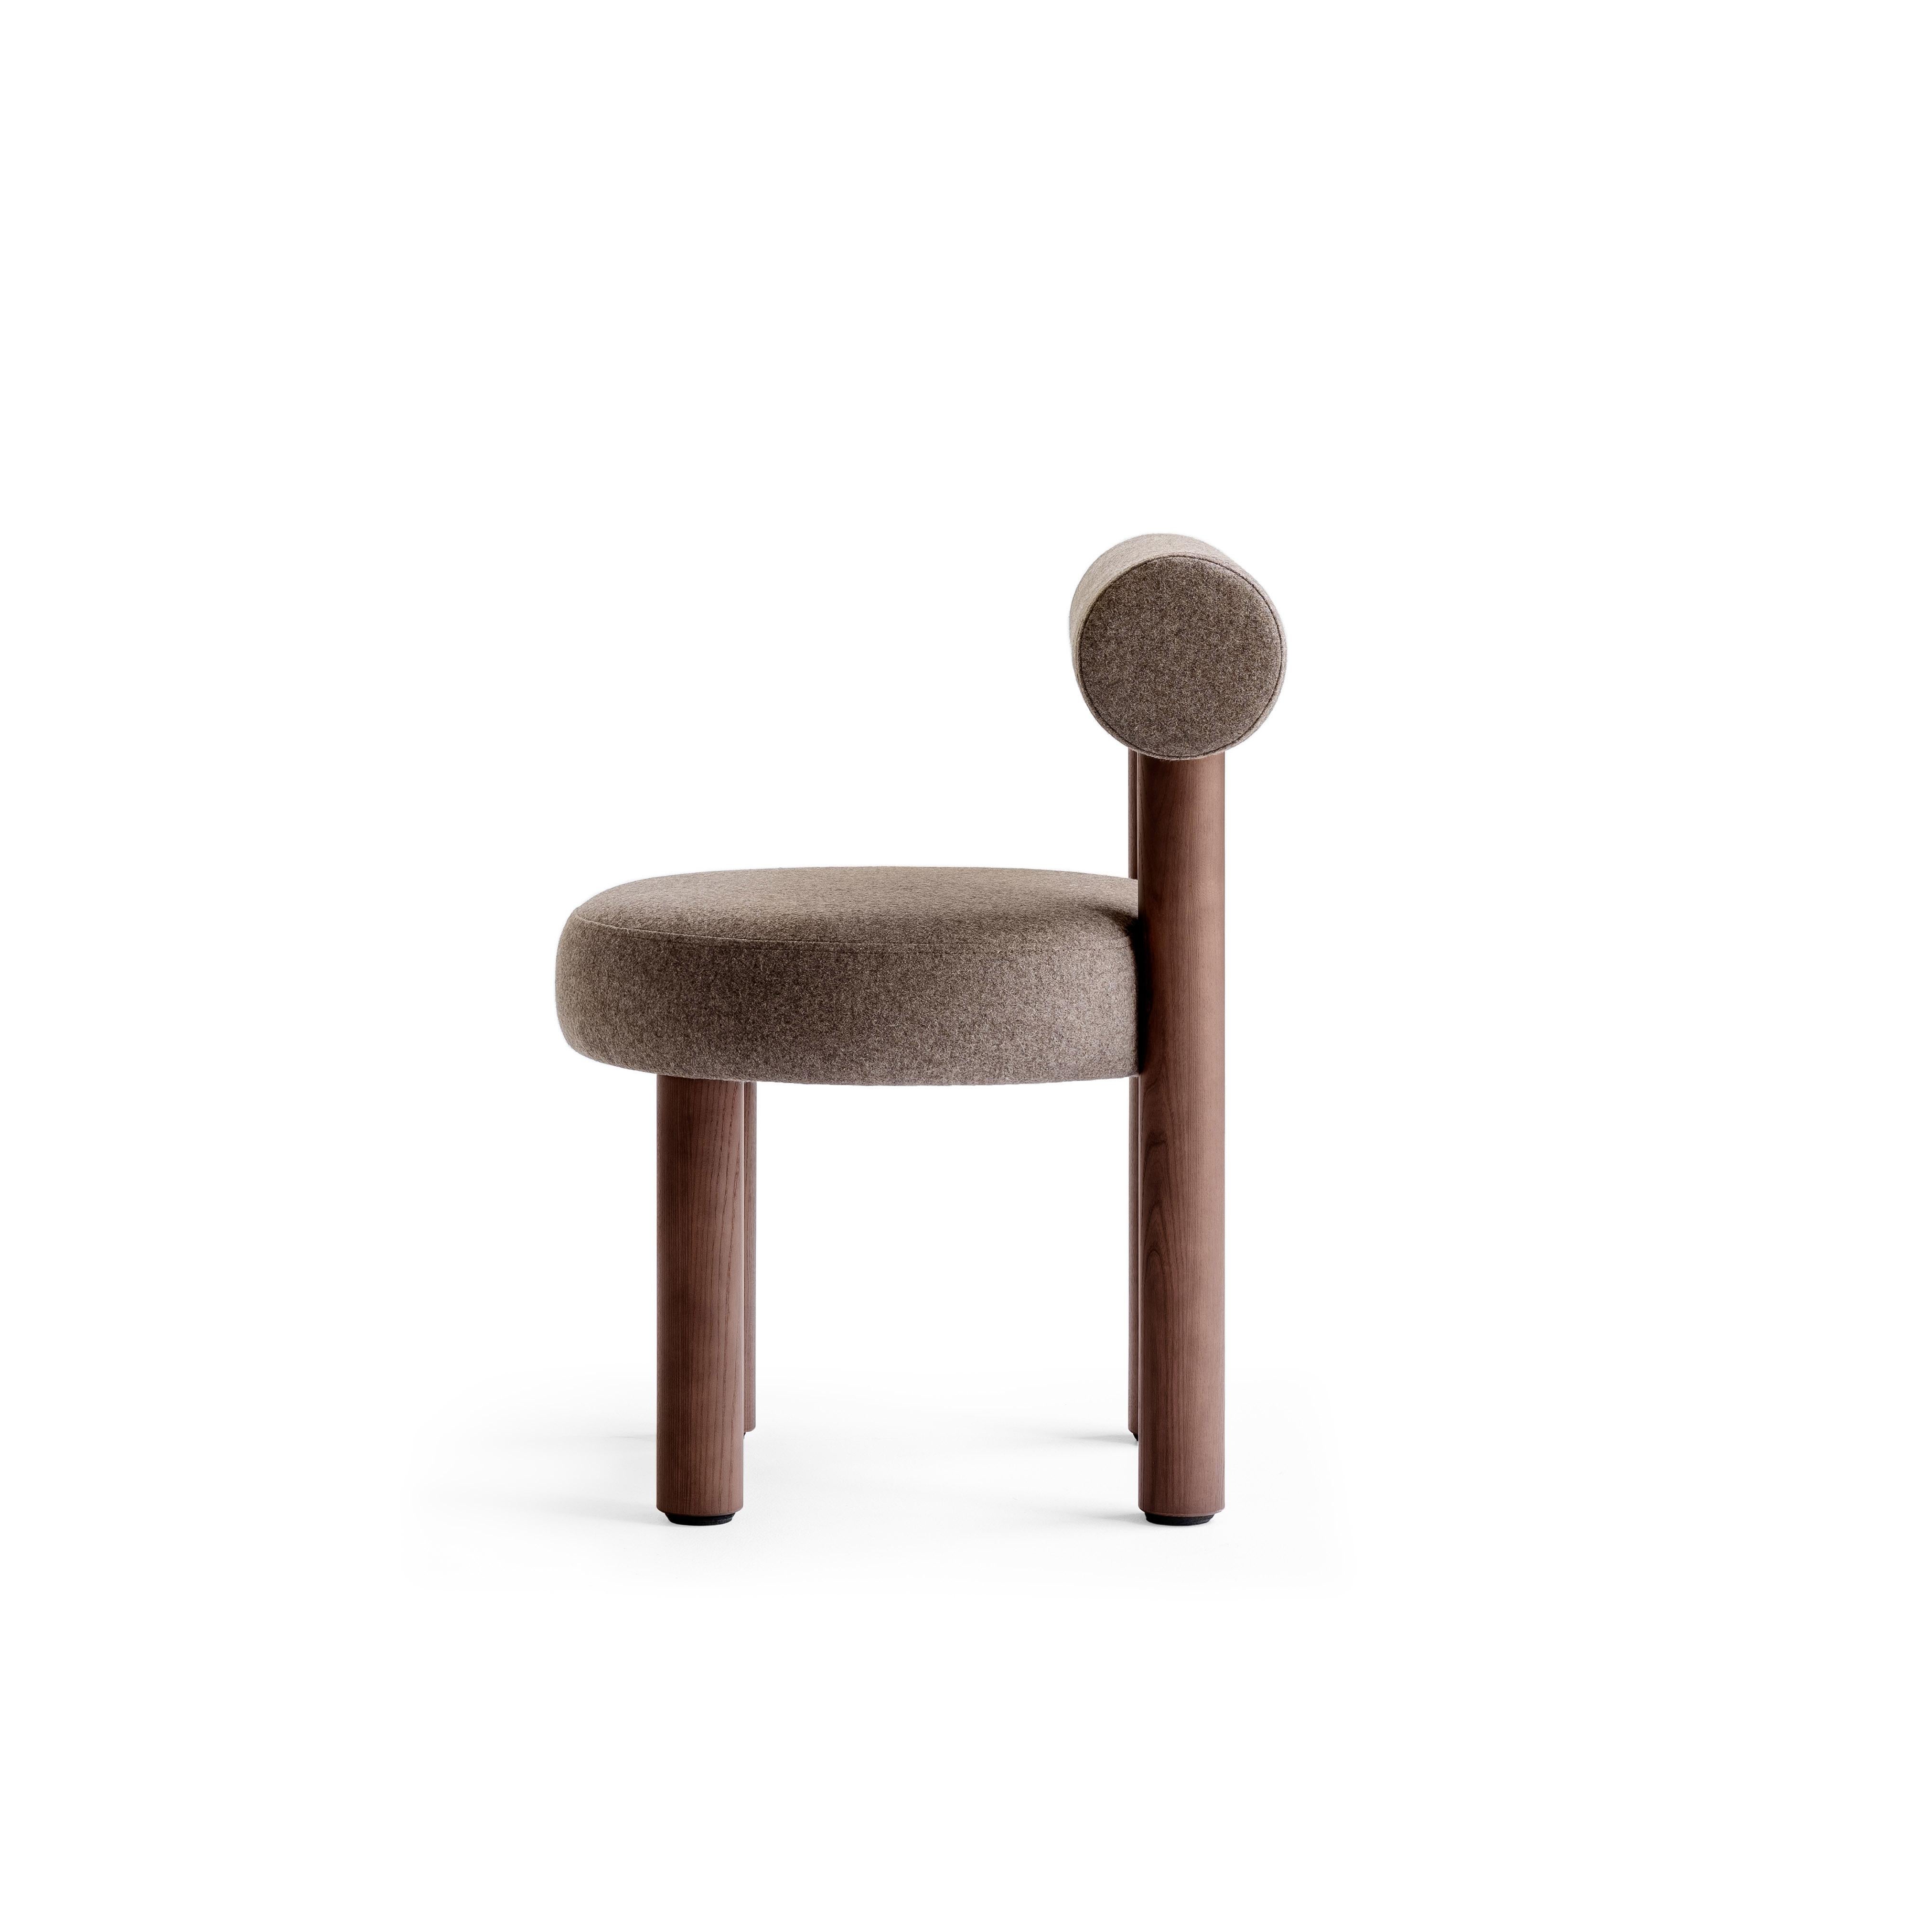 Contemporary Modern Dining Chair Gropius CS2 in Wool Fabric with Wooden Legs by Noom